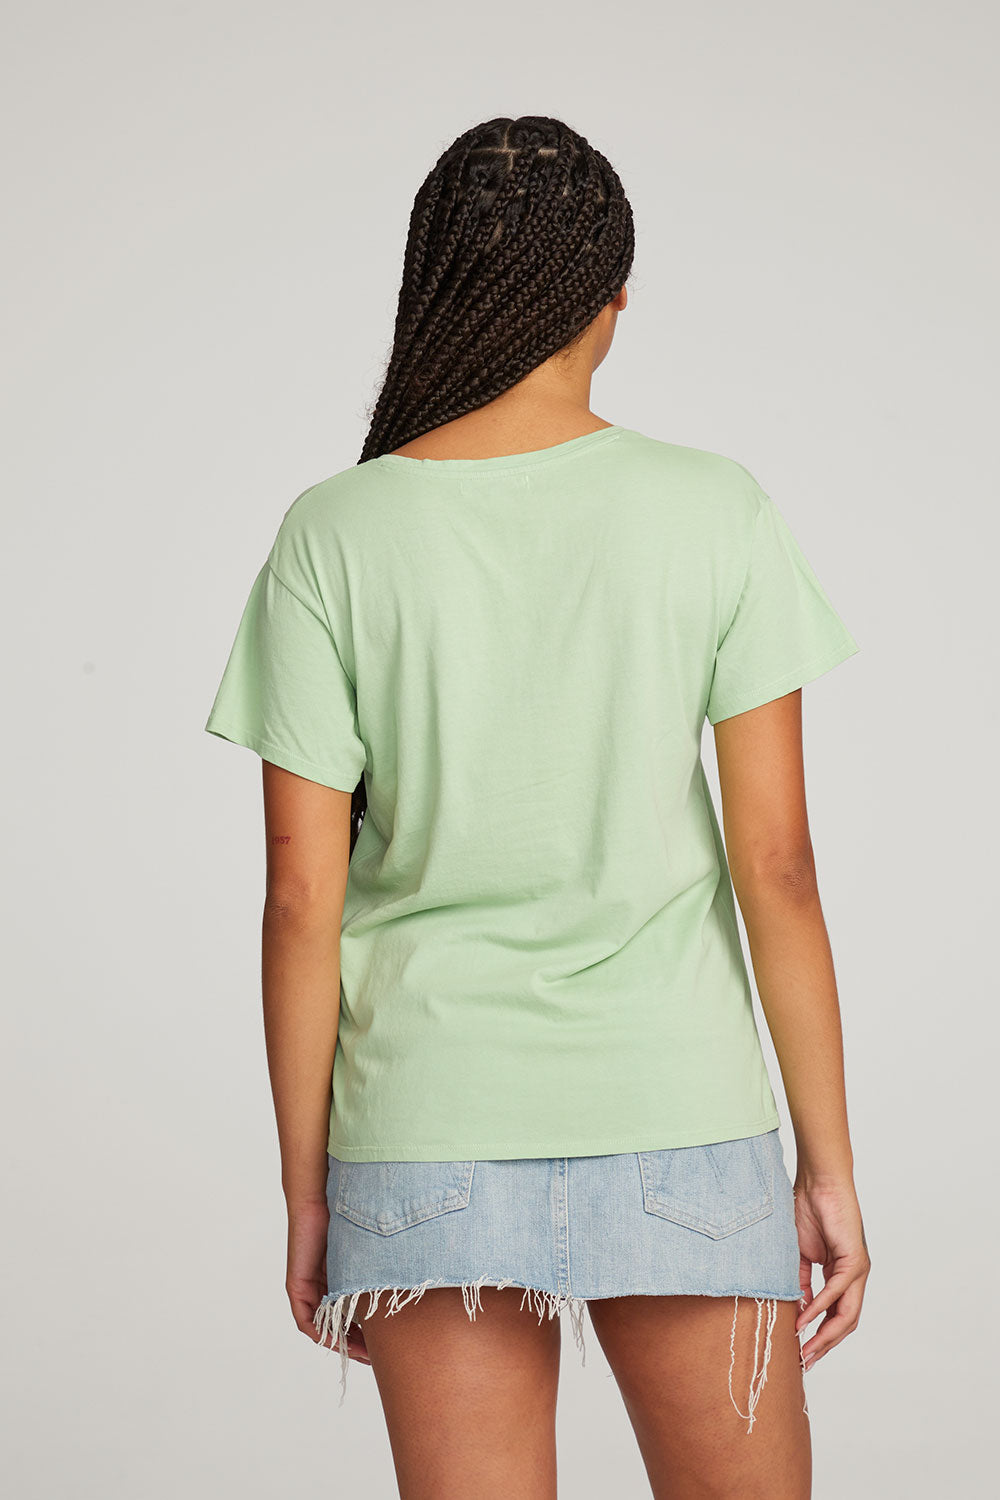 Everyday Essential Quiet Green V-neck Tee WOMENS chaserbrand